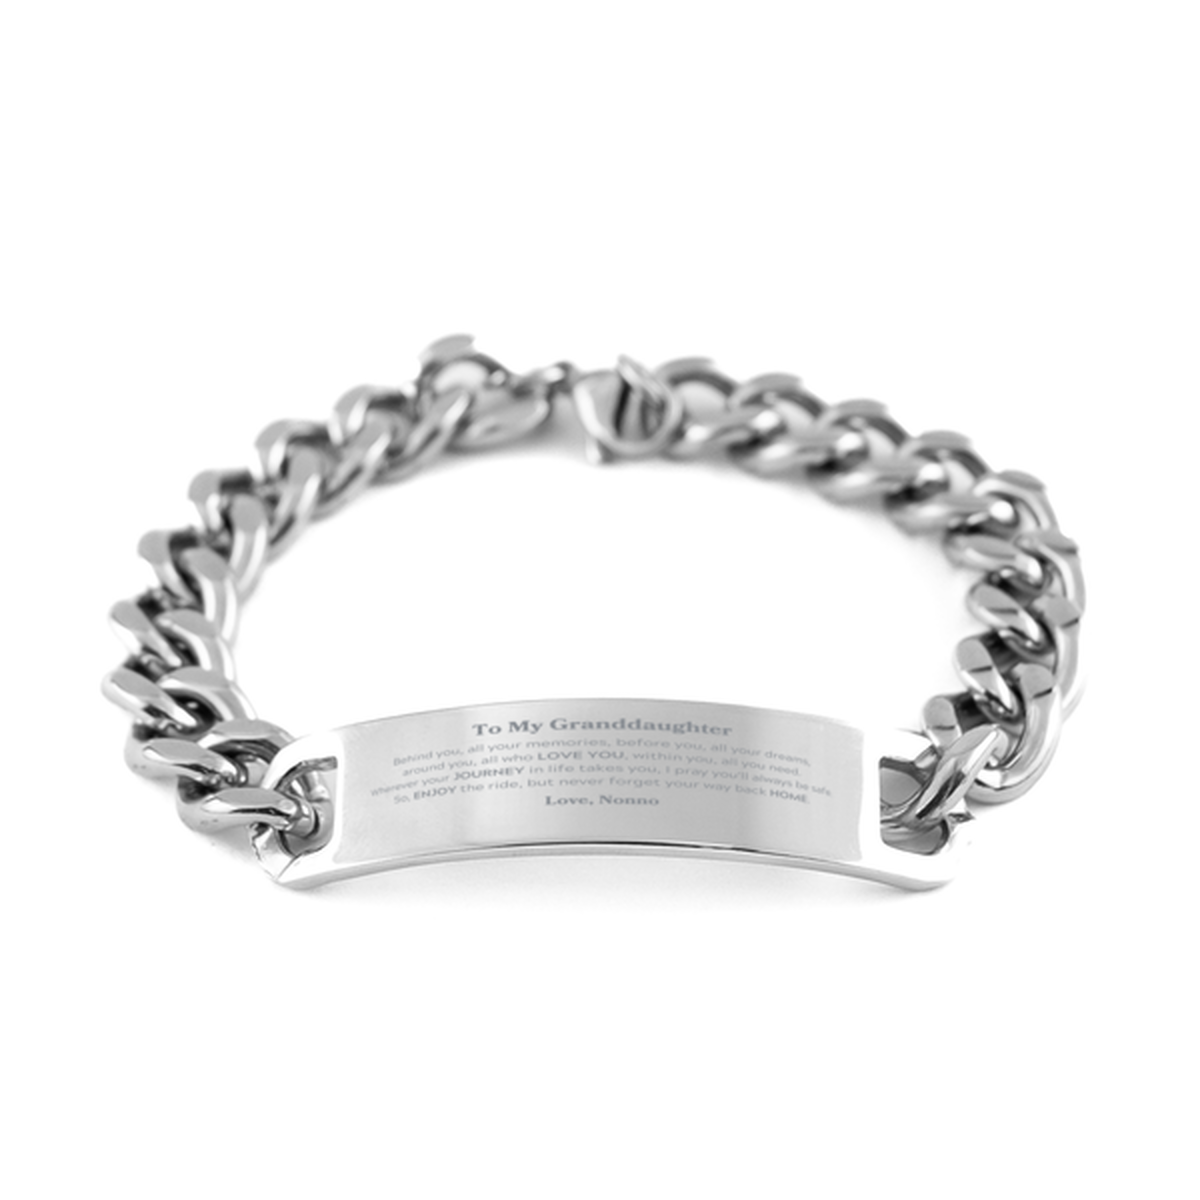 To My Granddaughter Graduation Gifts from Nonno, Granddaughter Cuban Chain Stainless Steel Bracelet Christmas Birthday Gifts for Granddaughter Behind you, all your memories, before you, all your dreams. Love, Nonno